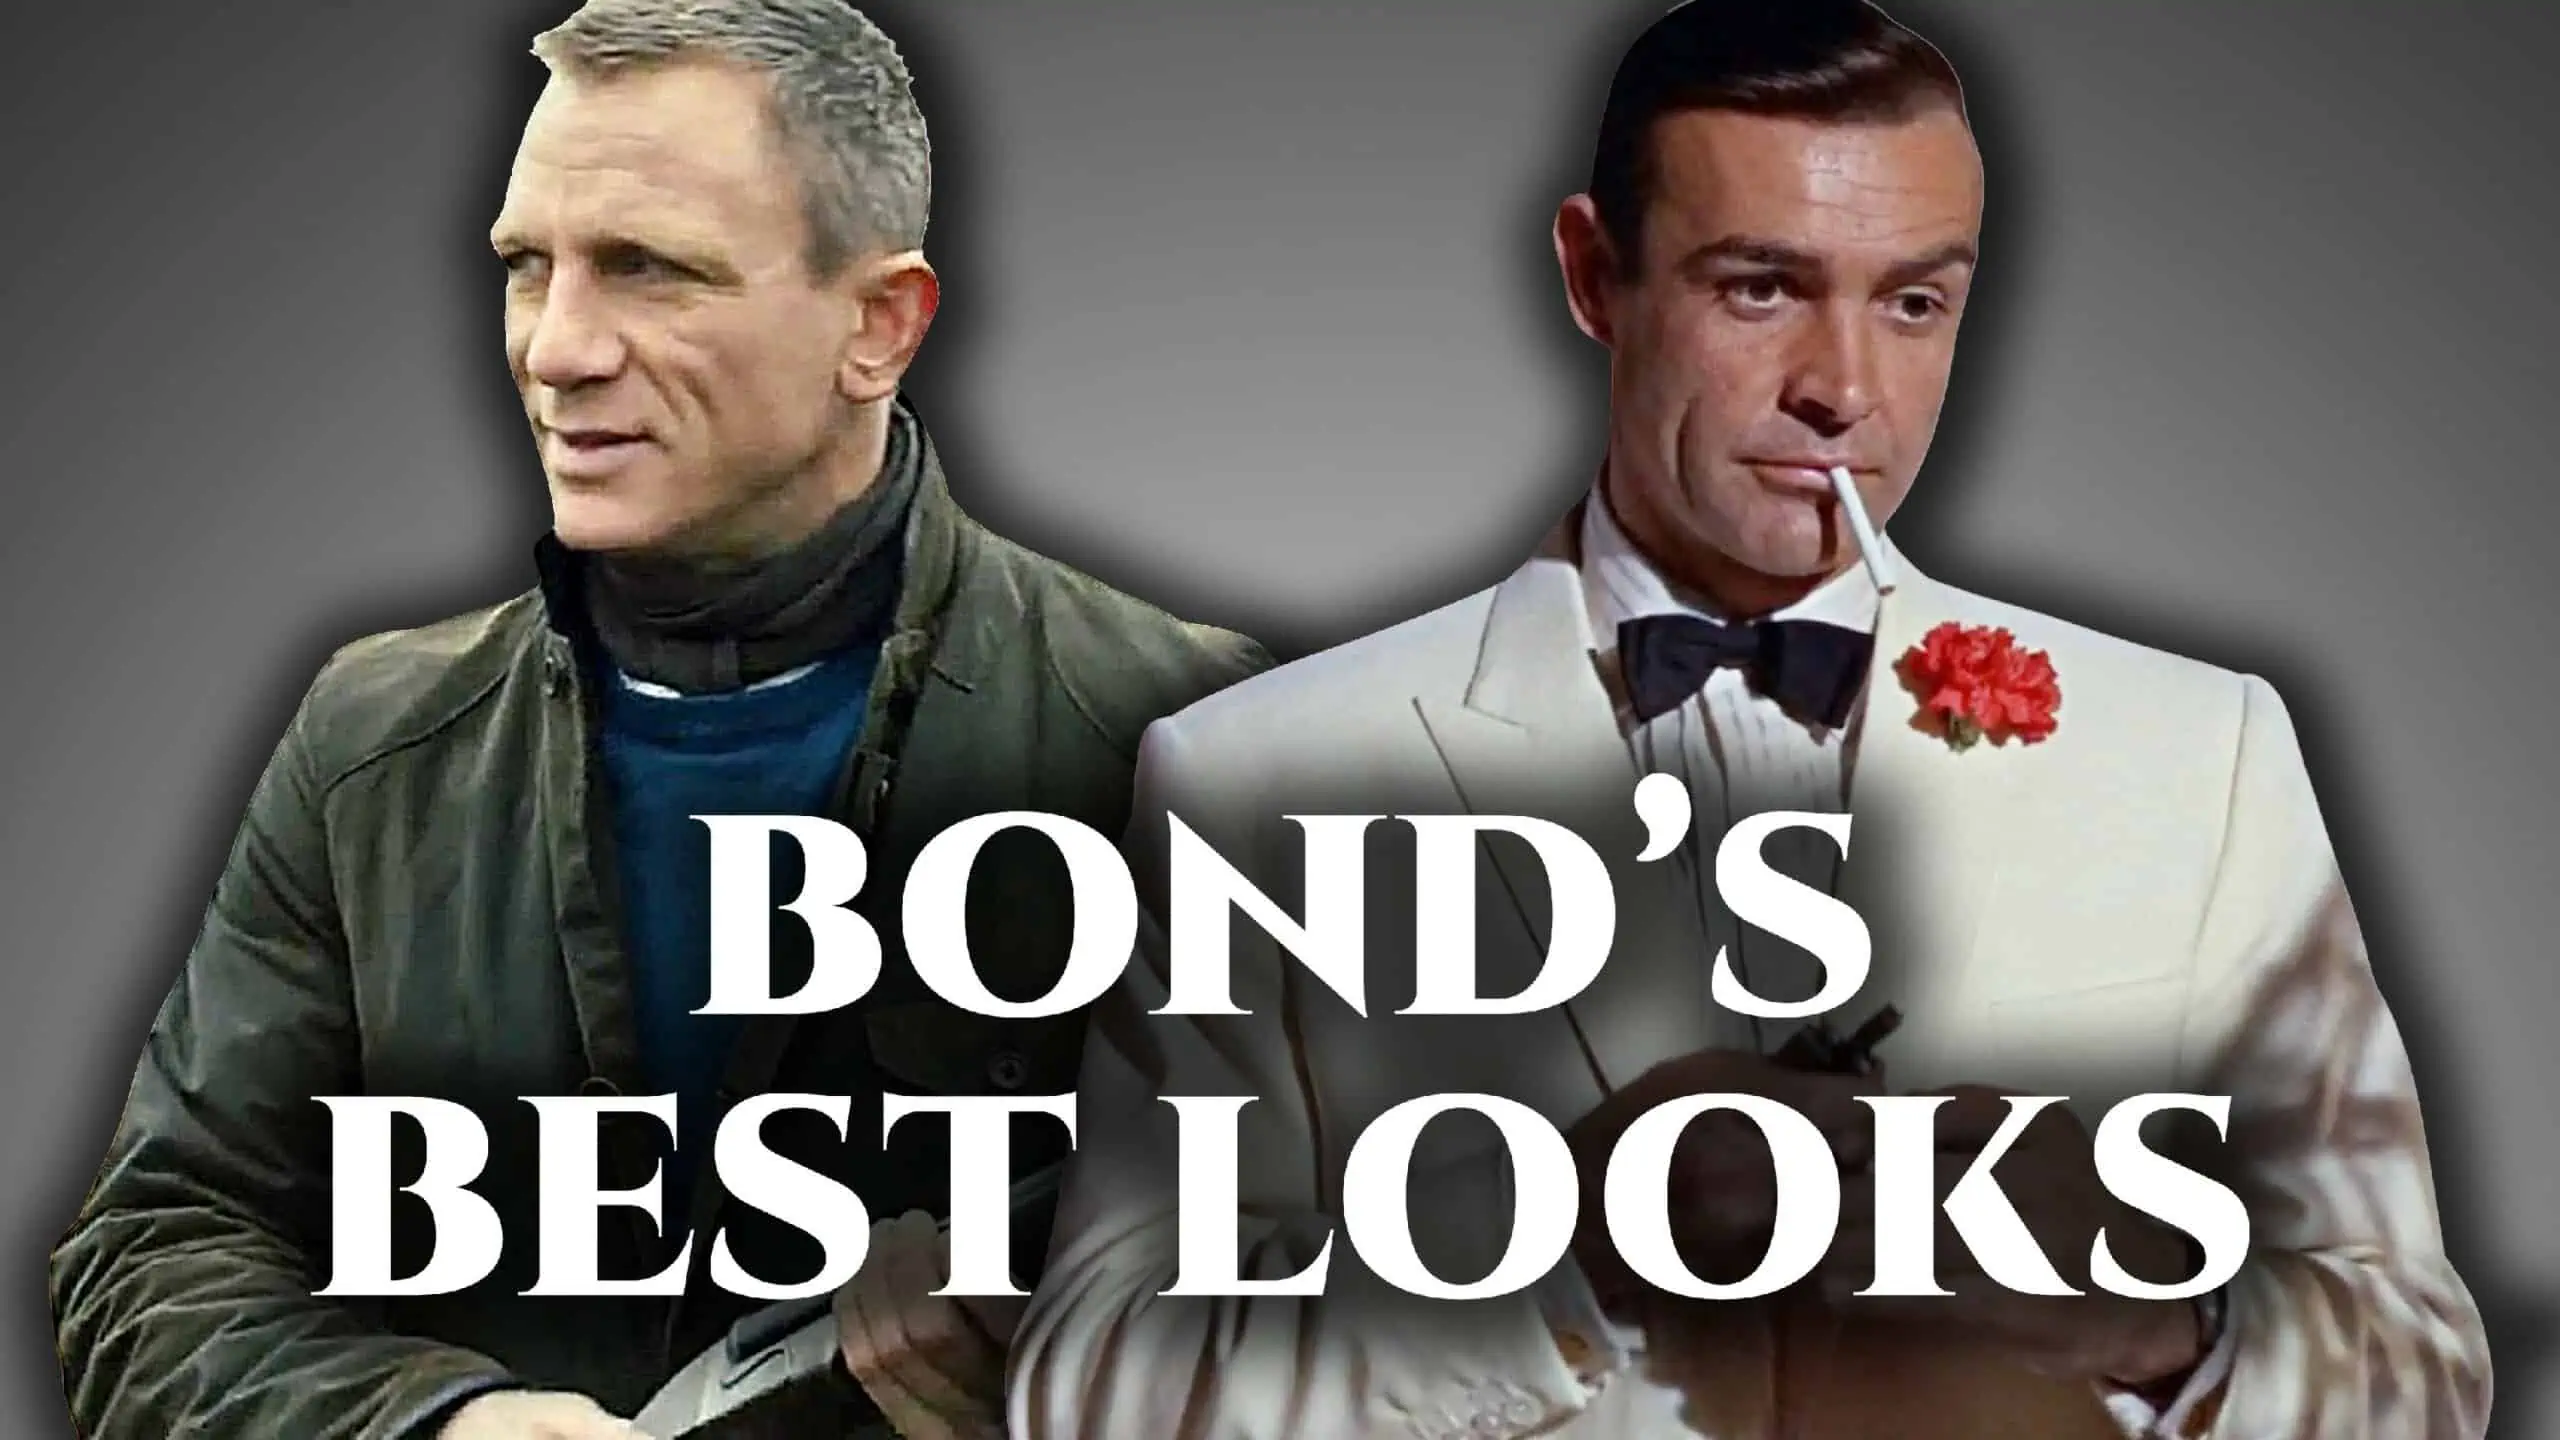 James Bond's Best Looks - Our Favorite 007 Outfits, Reviewed